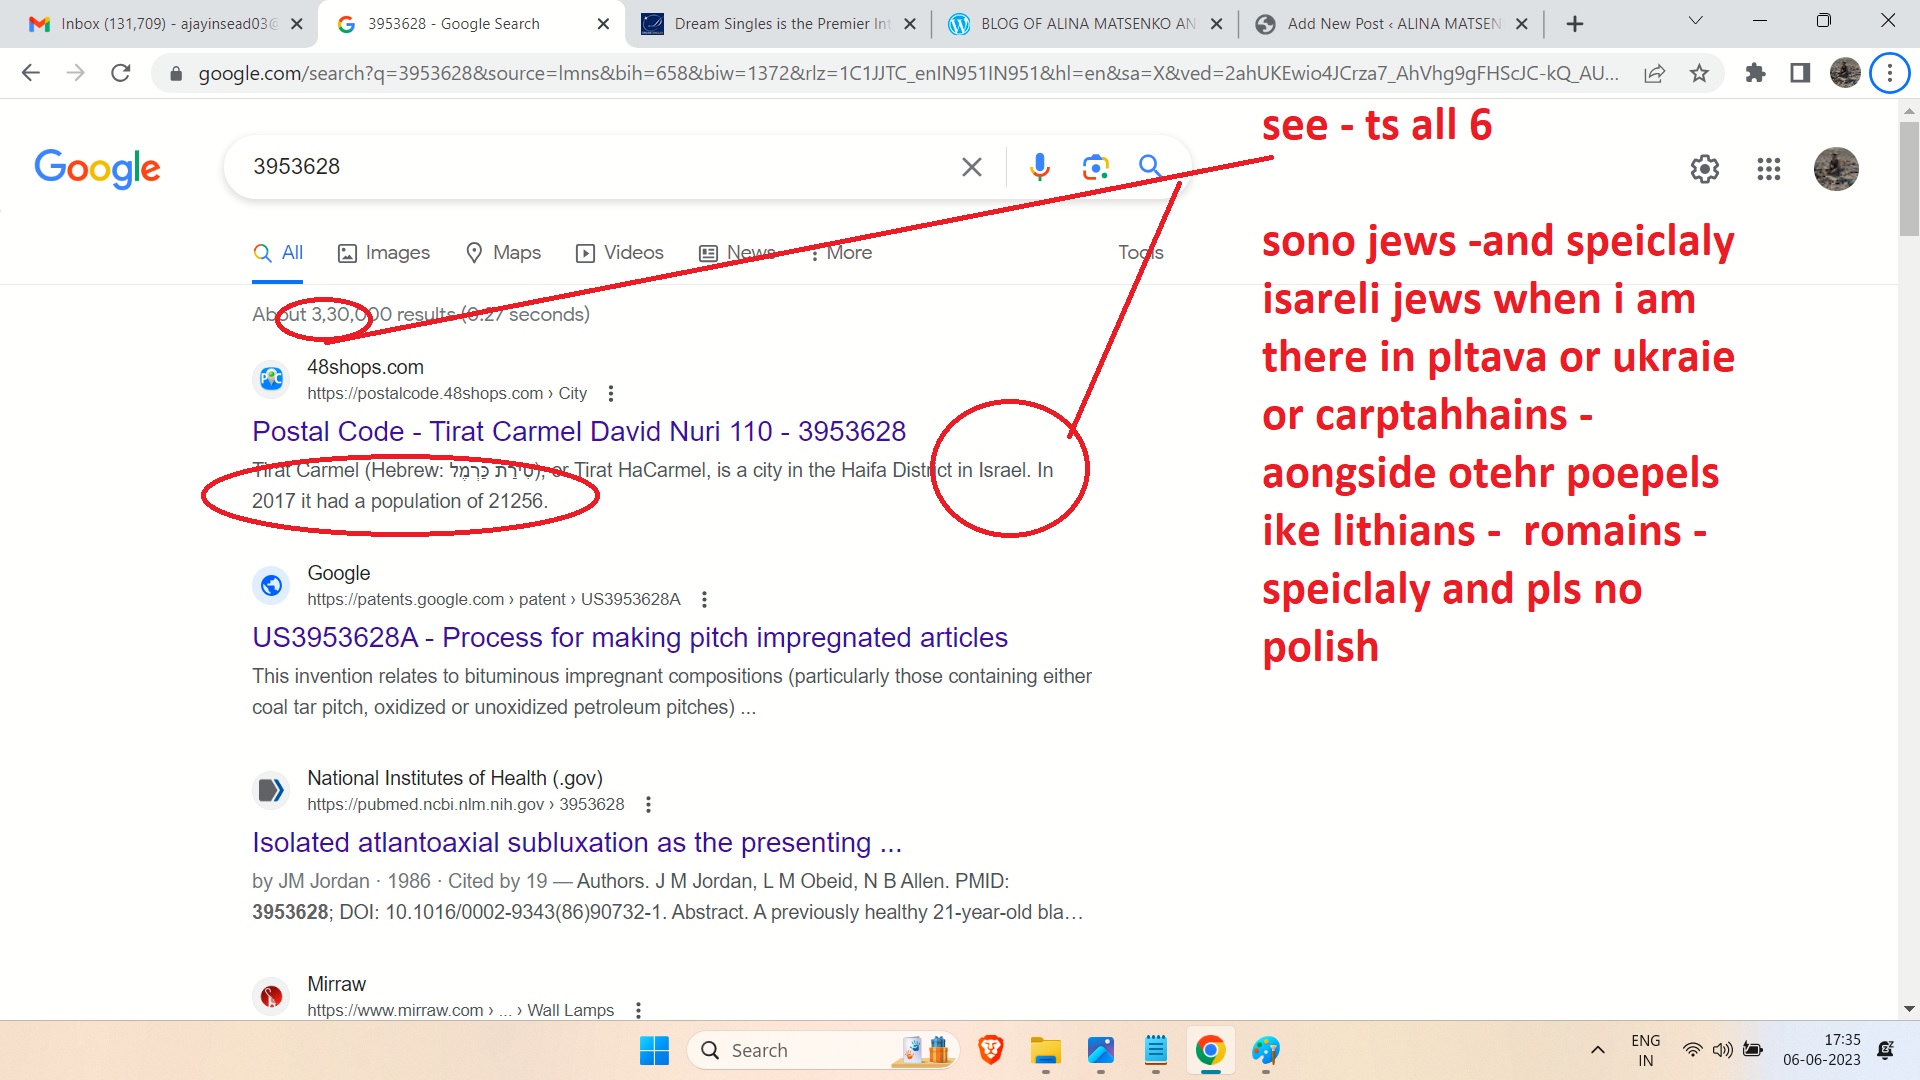 alina matsenko ajaymishra - see this what is this siarel and what om com or hat - alina pls pleas etll ejw nt to be theer in oltav and iukariena dn carpathaisnw heni am there